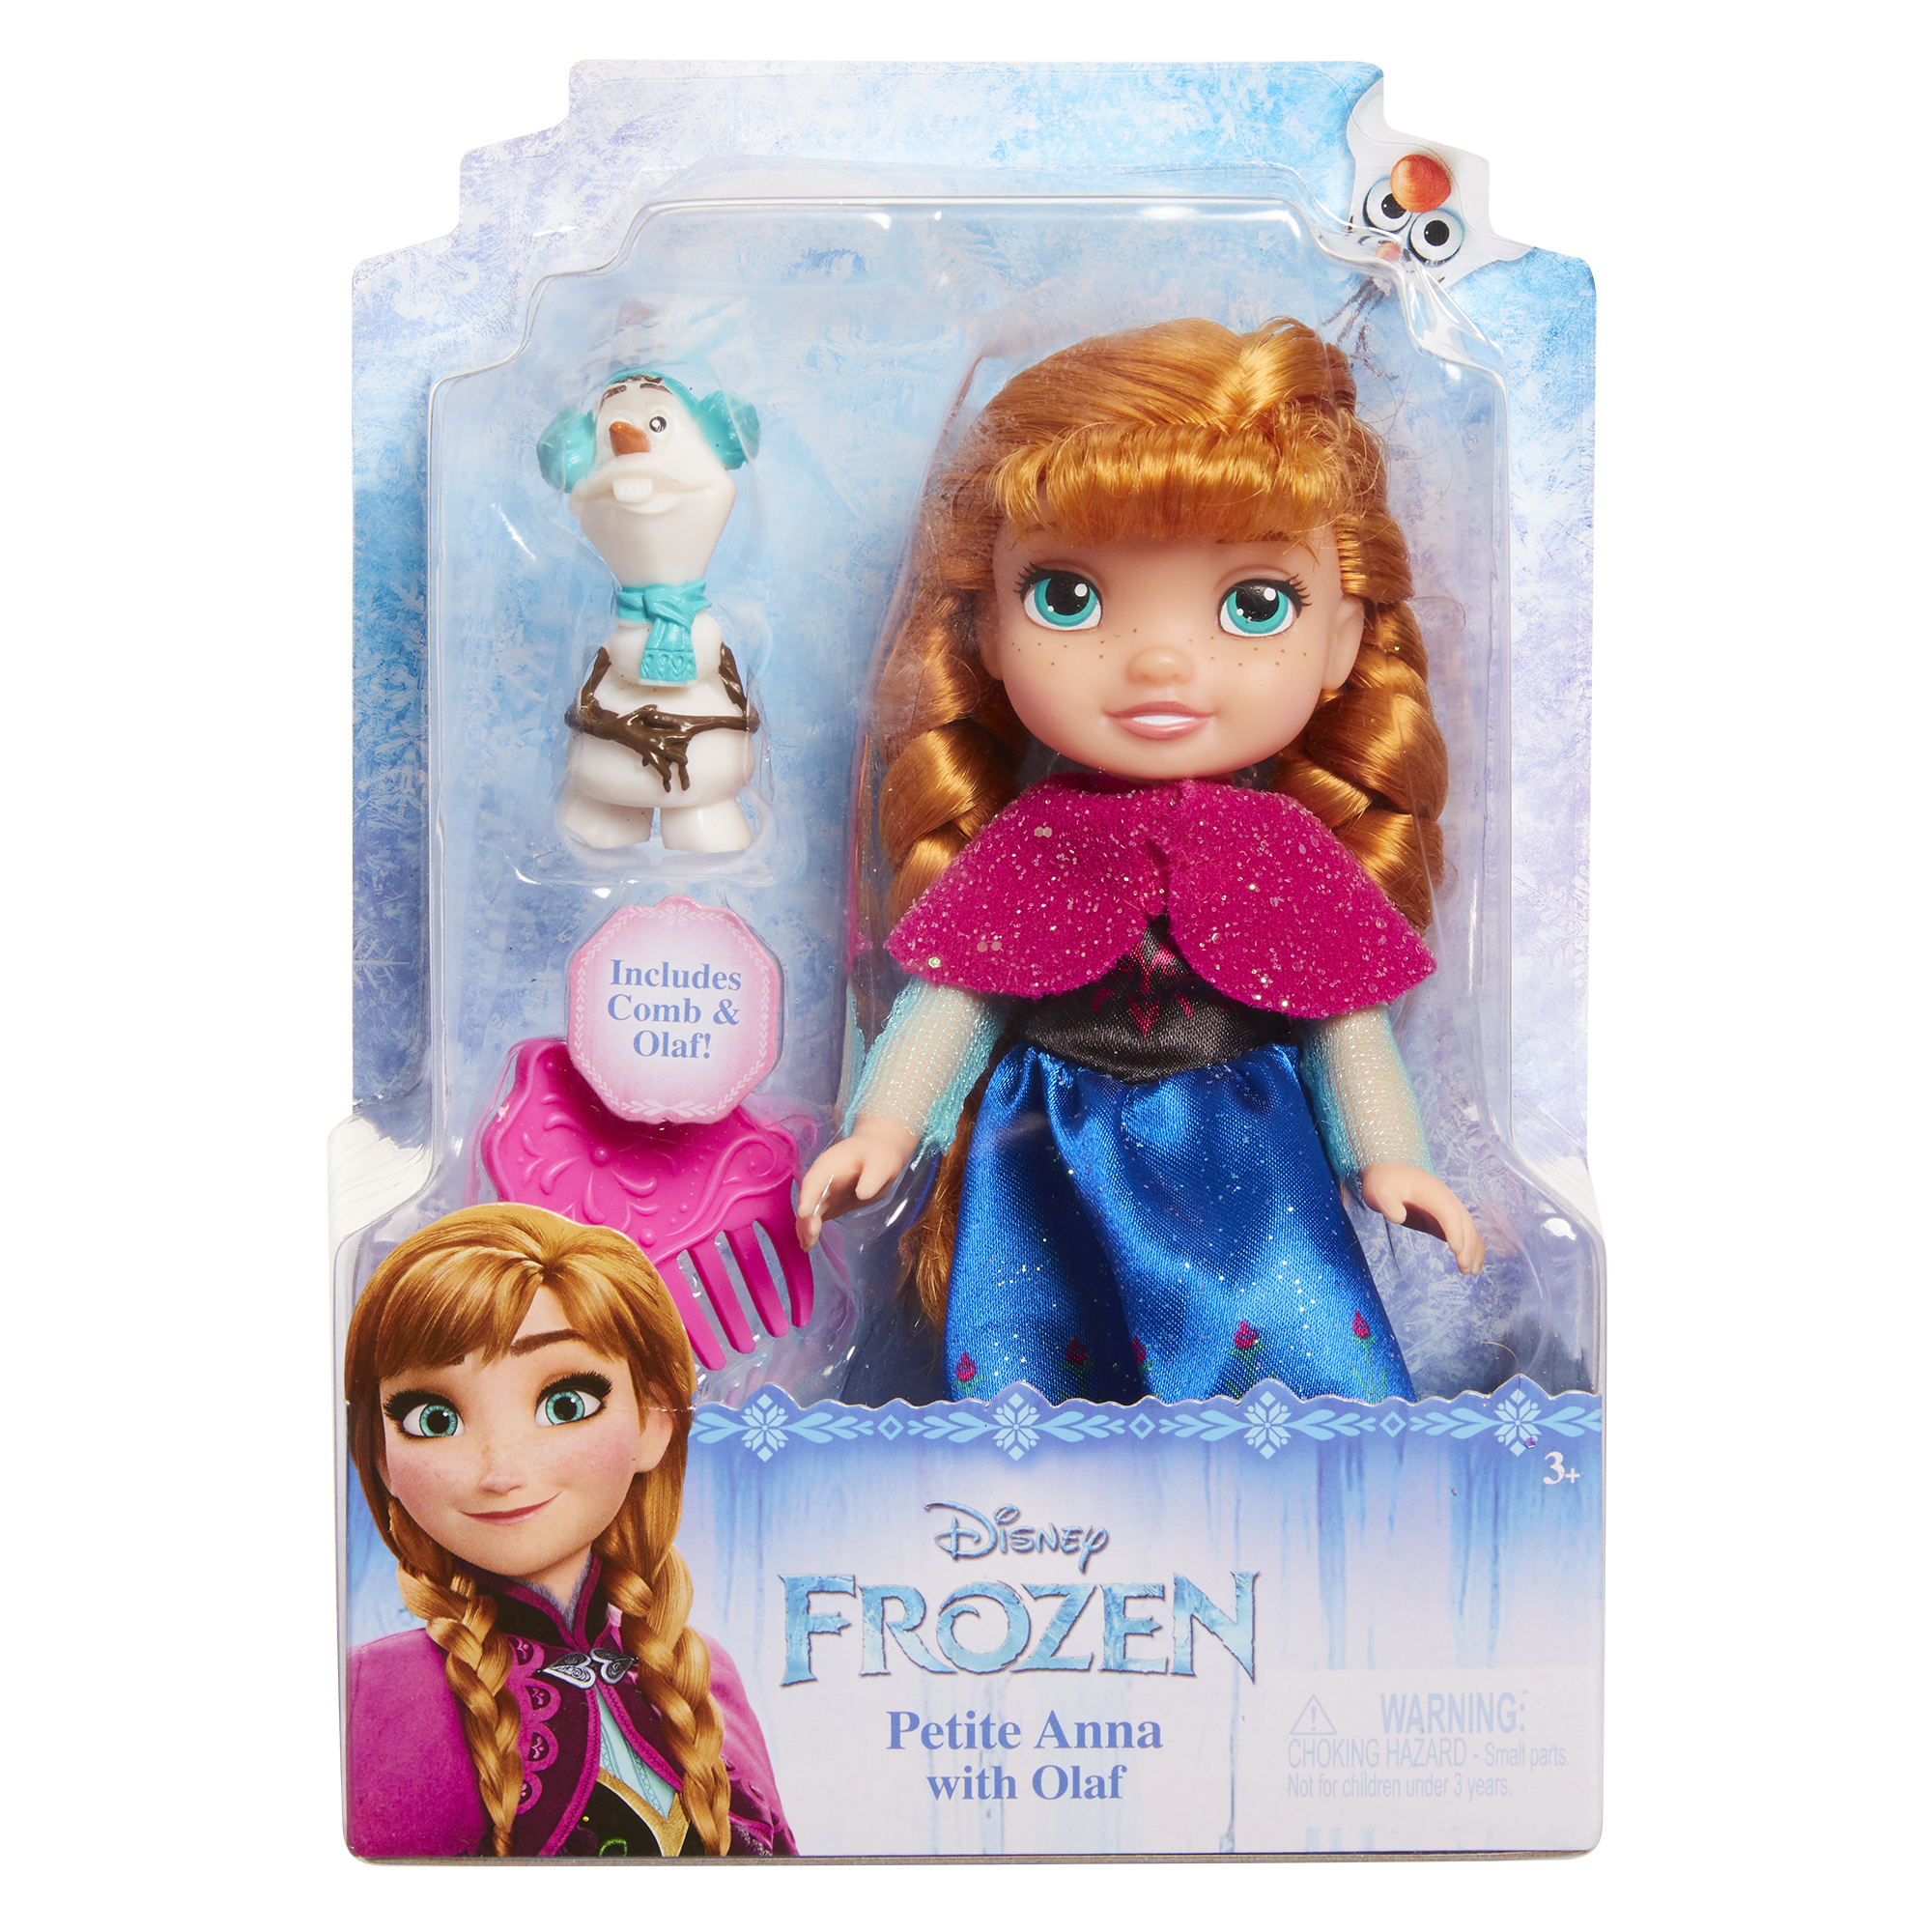 Disney Frozen Petite Anna Doll with Olaf - image 3 of 6